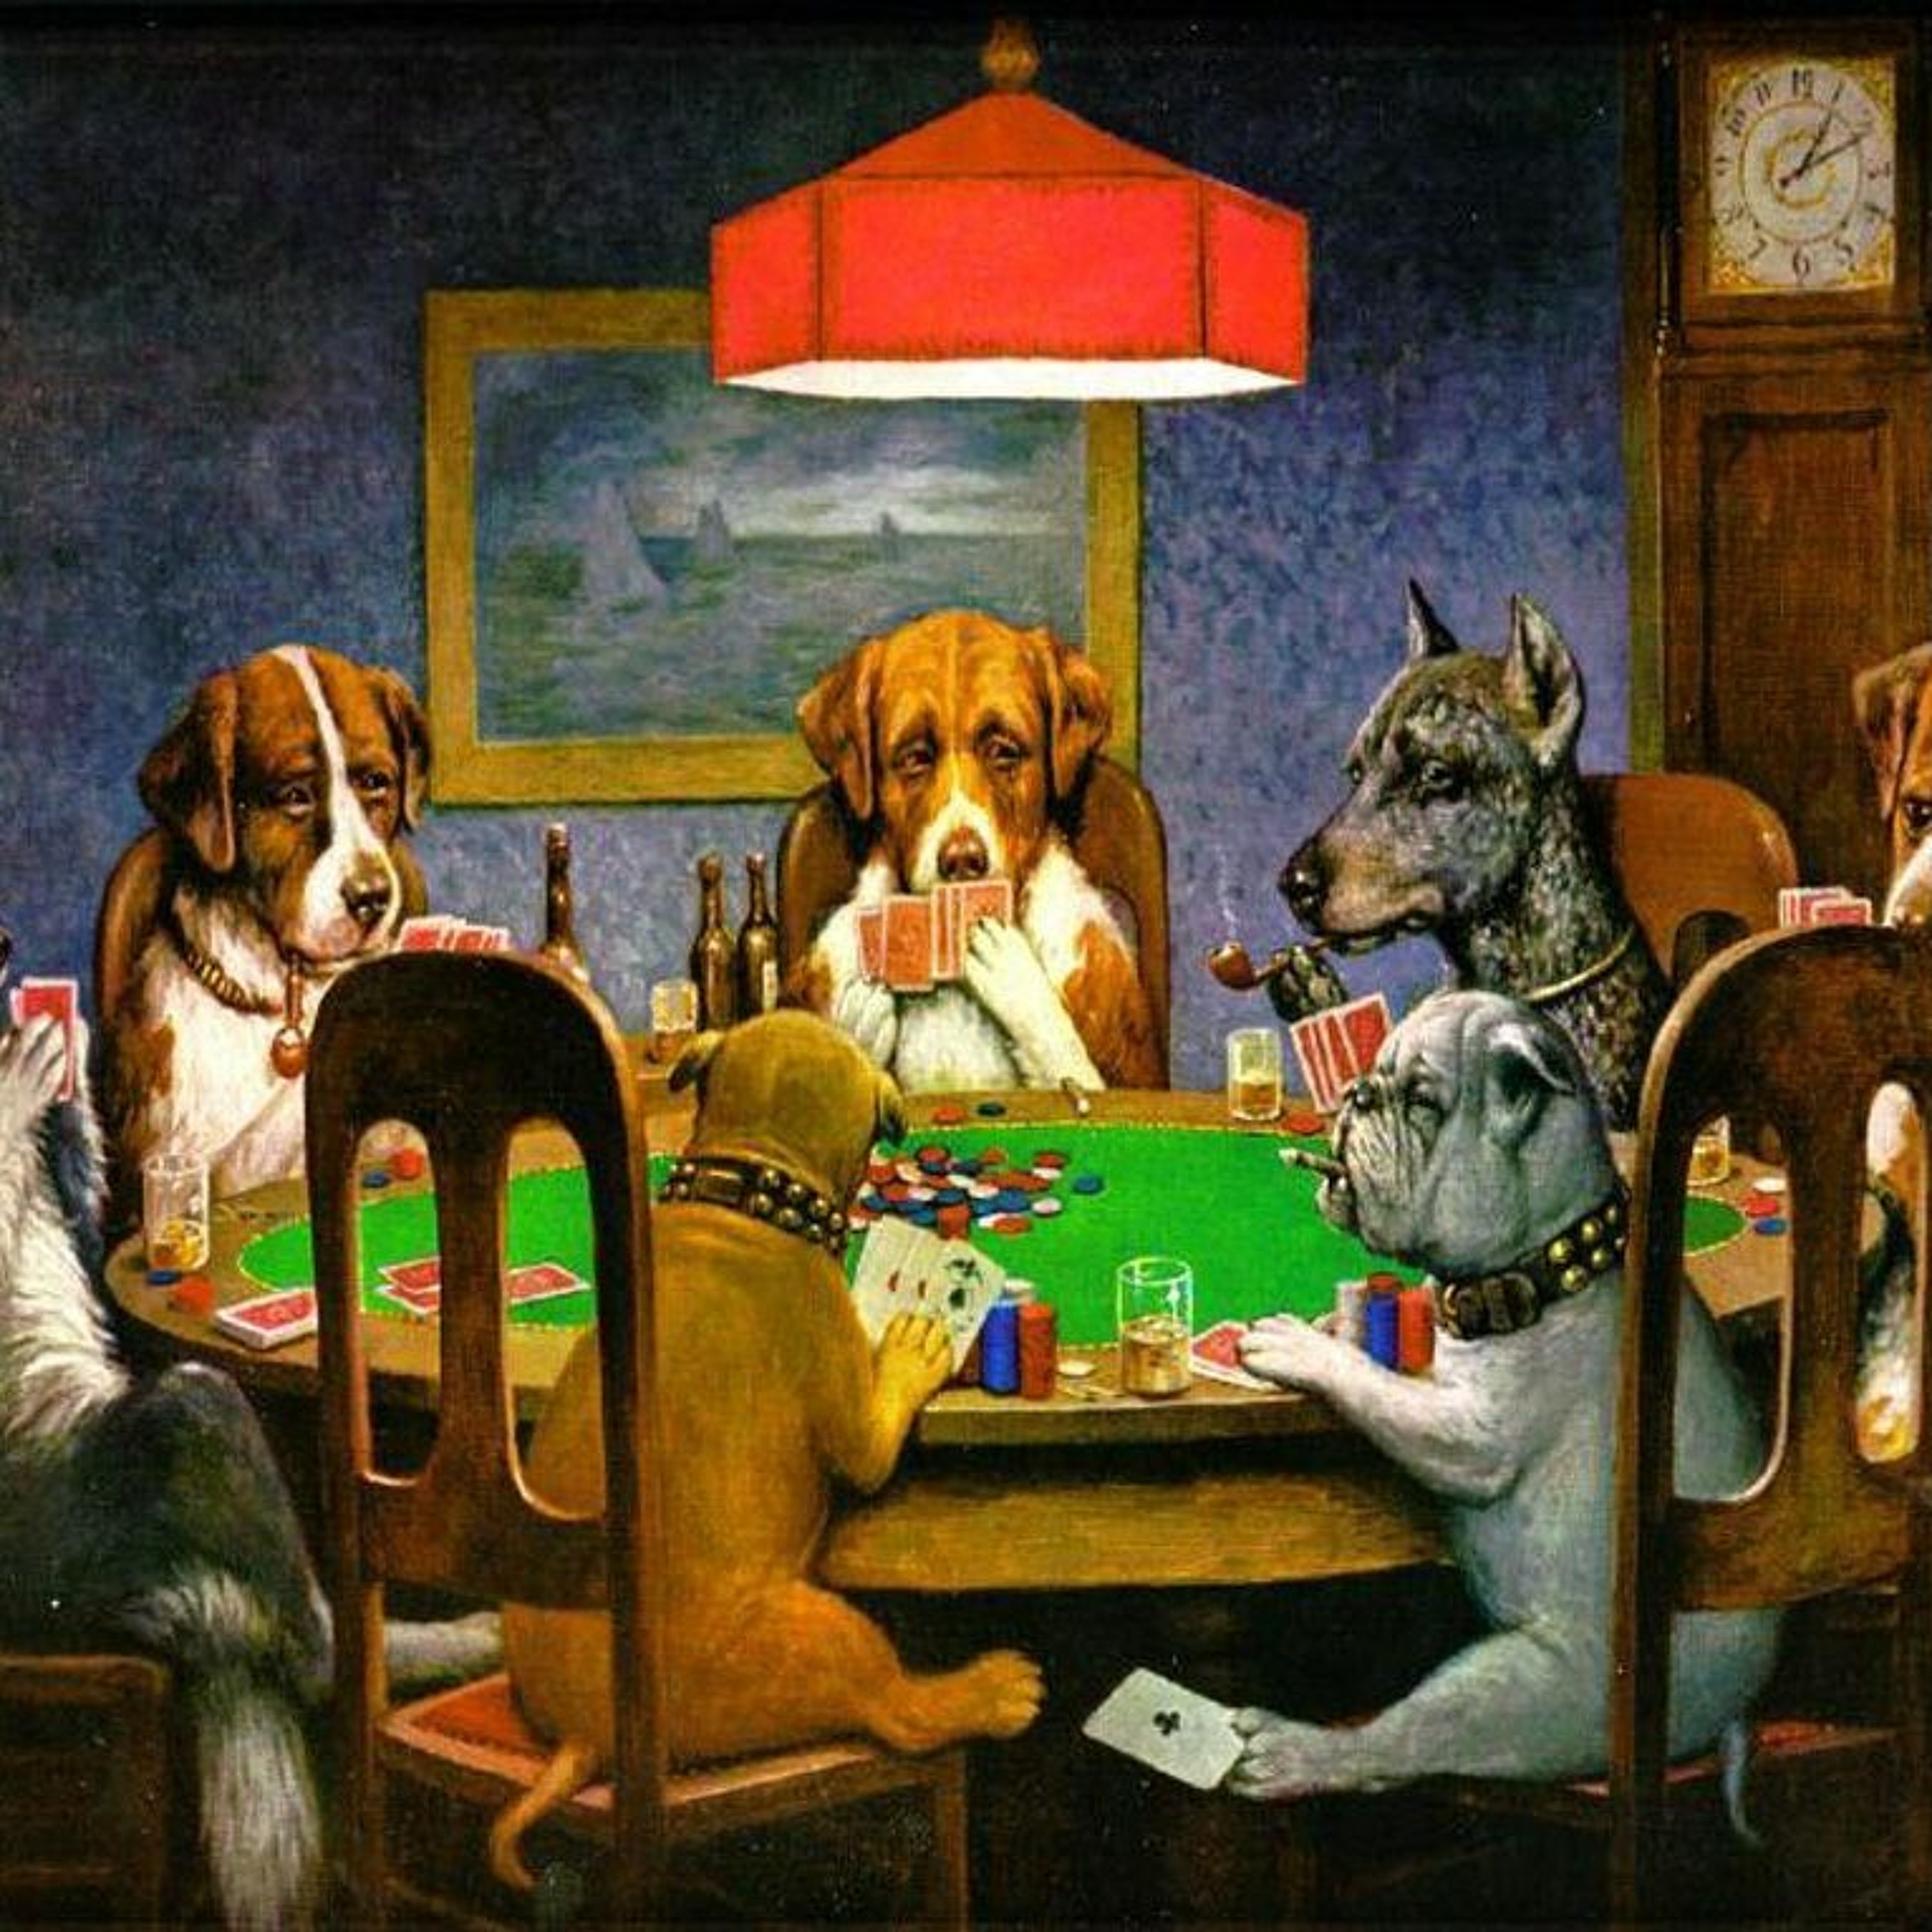 Ep. 26 - C.M. Coolidge's "Dogs Playing Poker" (1903)